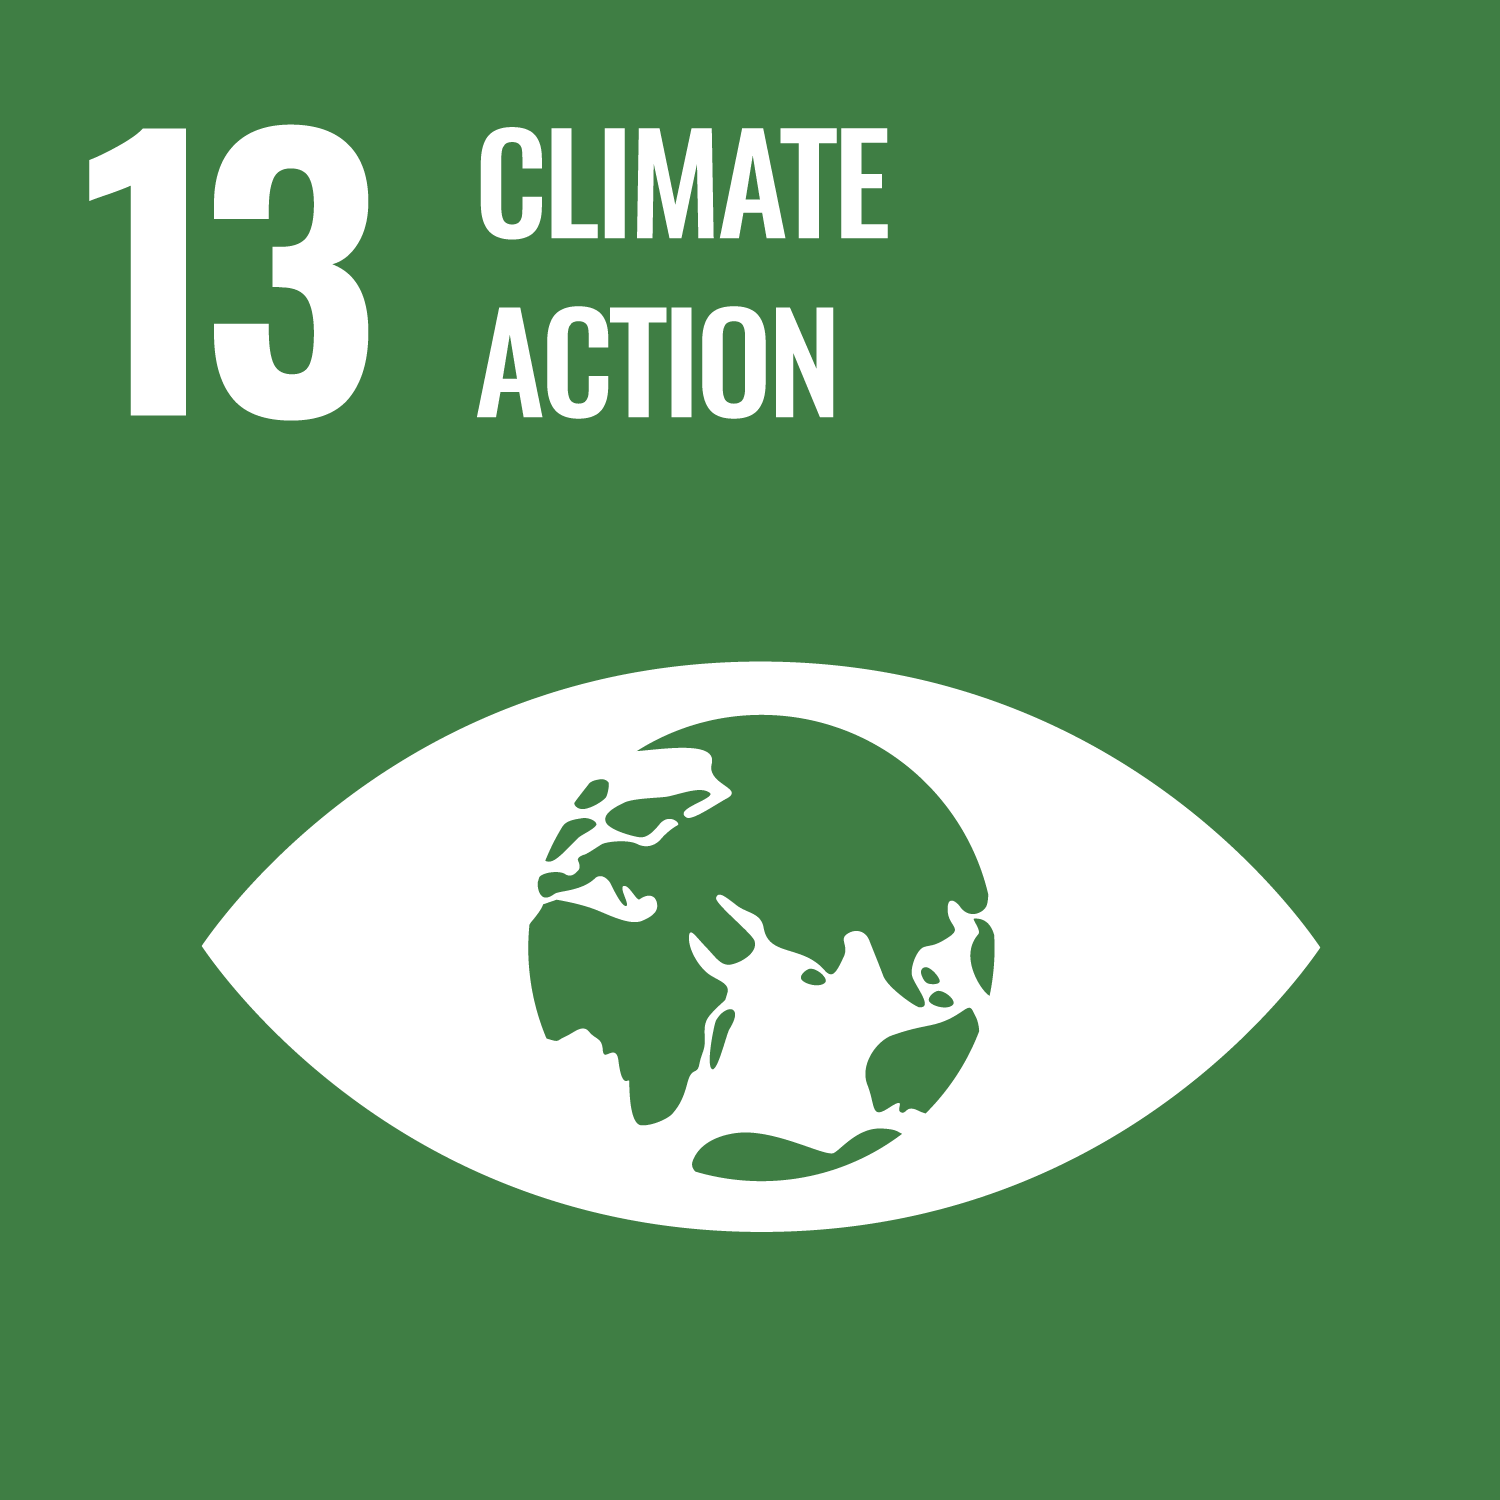 UN sustainable development goal number 13 Climate action. Link to goal number 13.